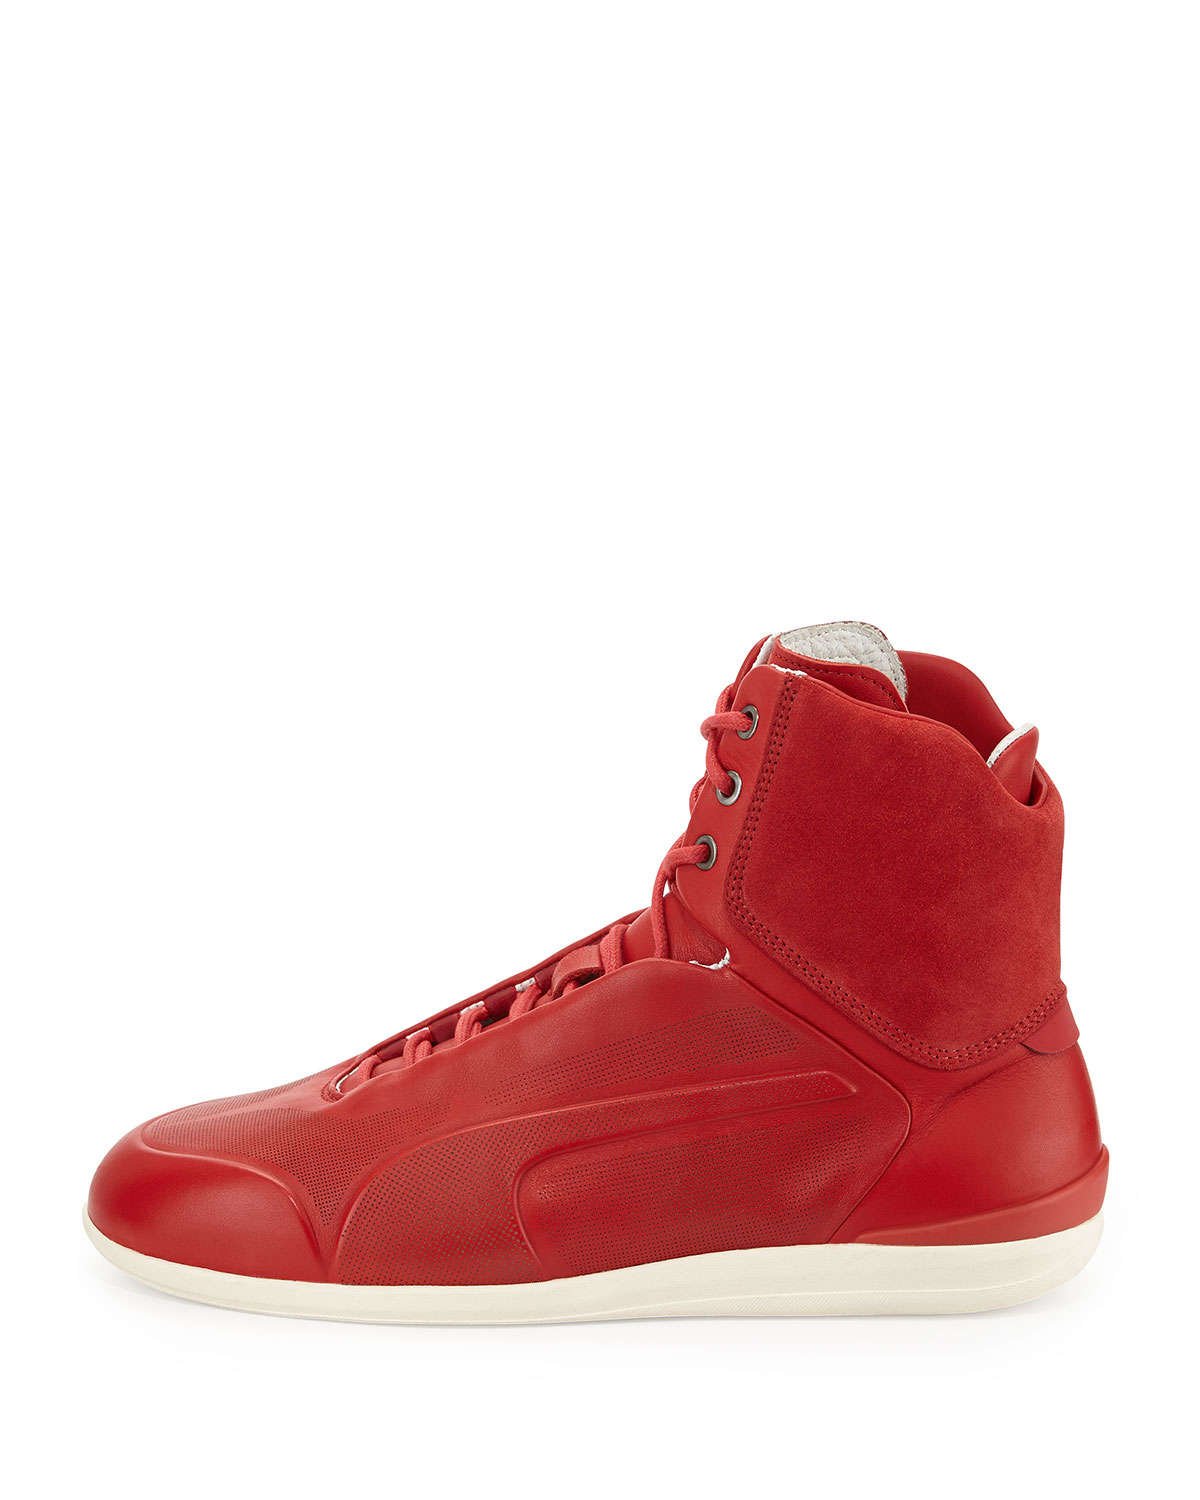 puma red high top sneakers